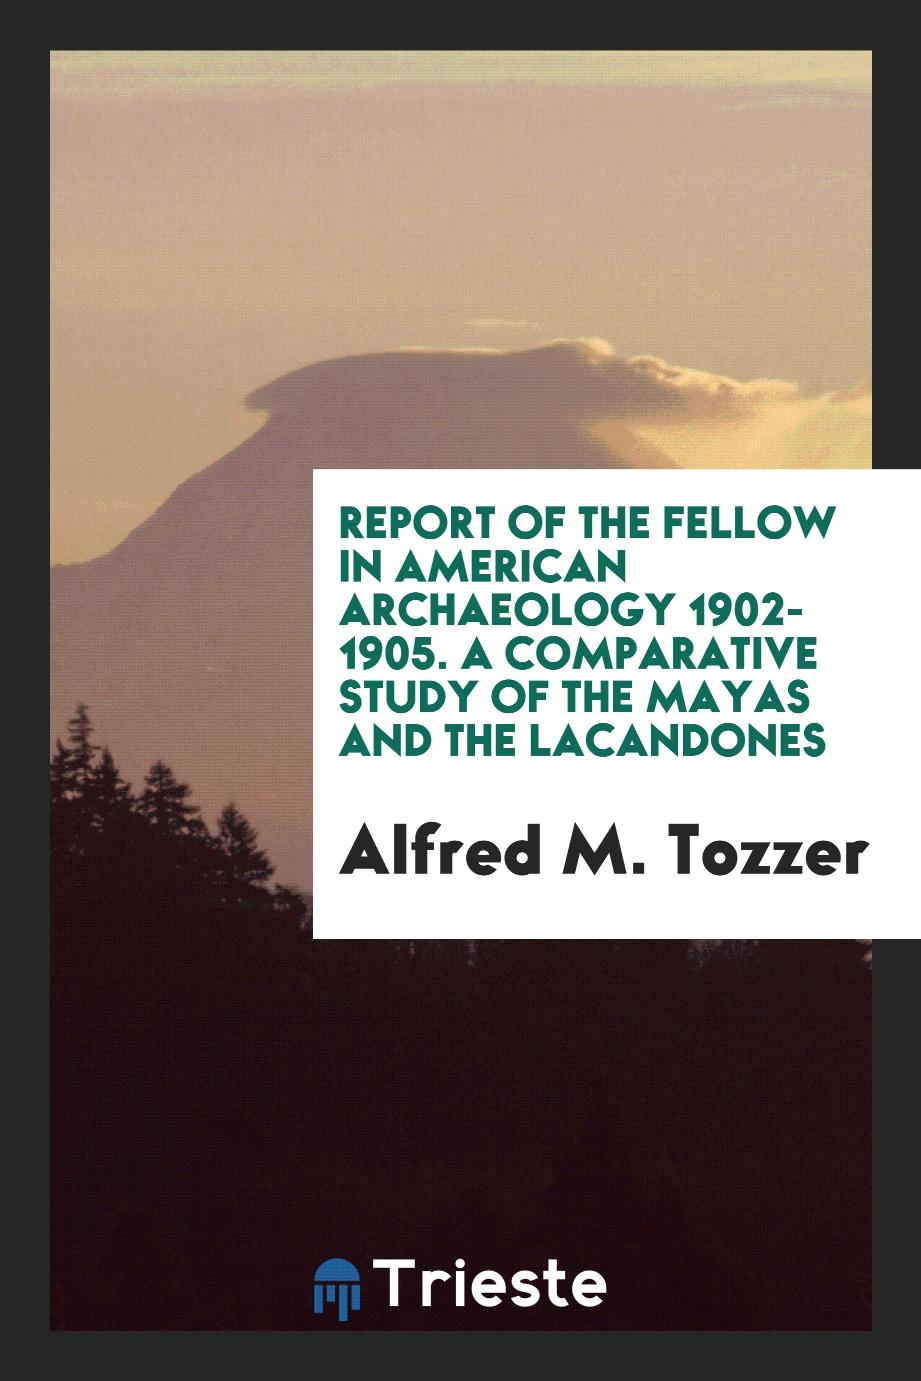 Report of the fellow in American archaeology 1902-1905. A comparative study of the mayas and the Lacandones